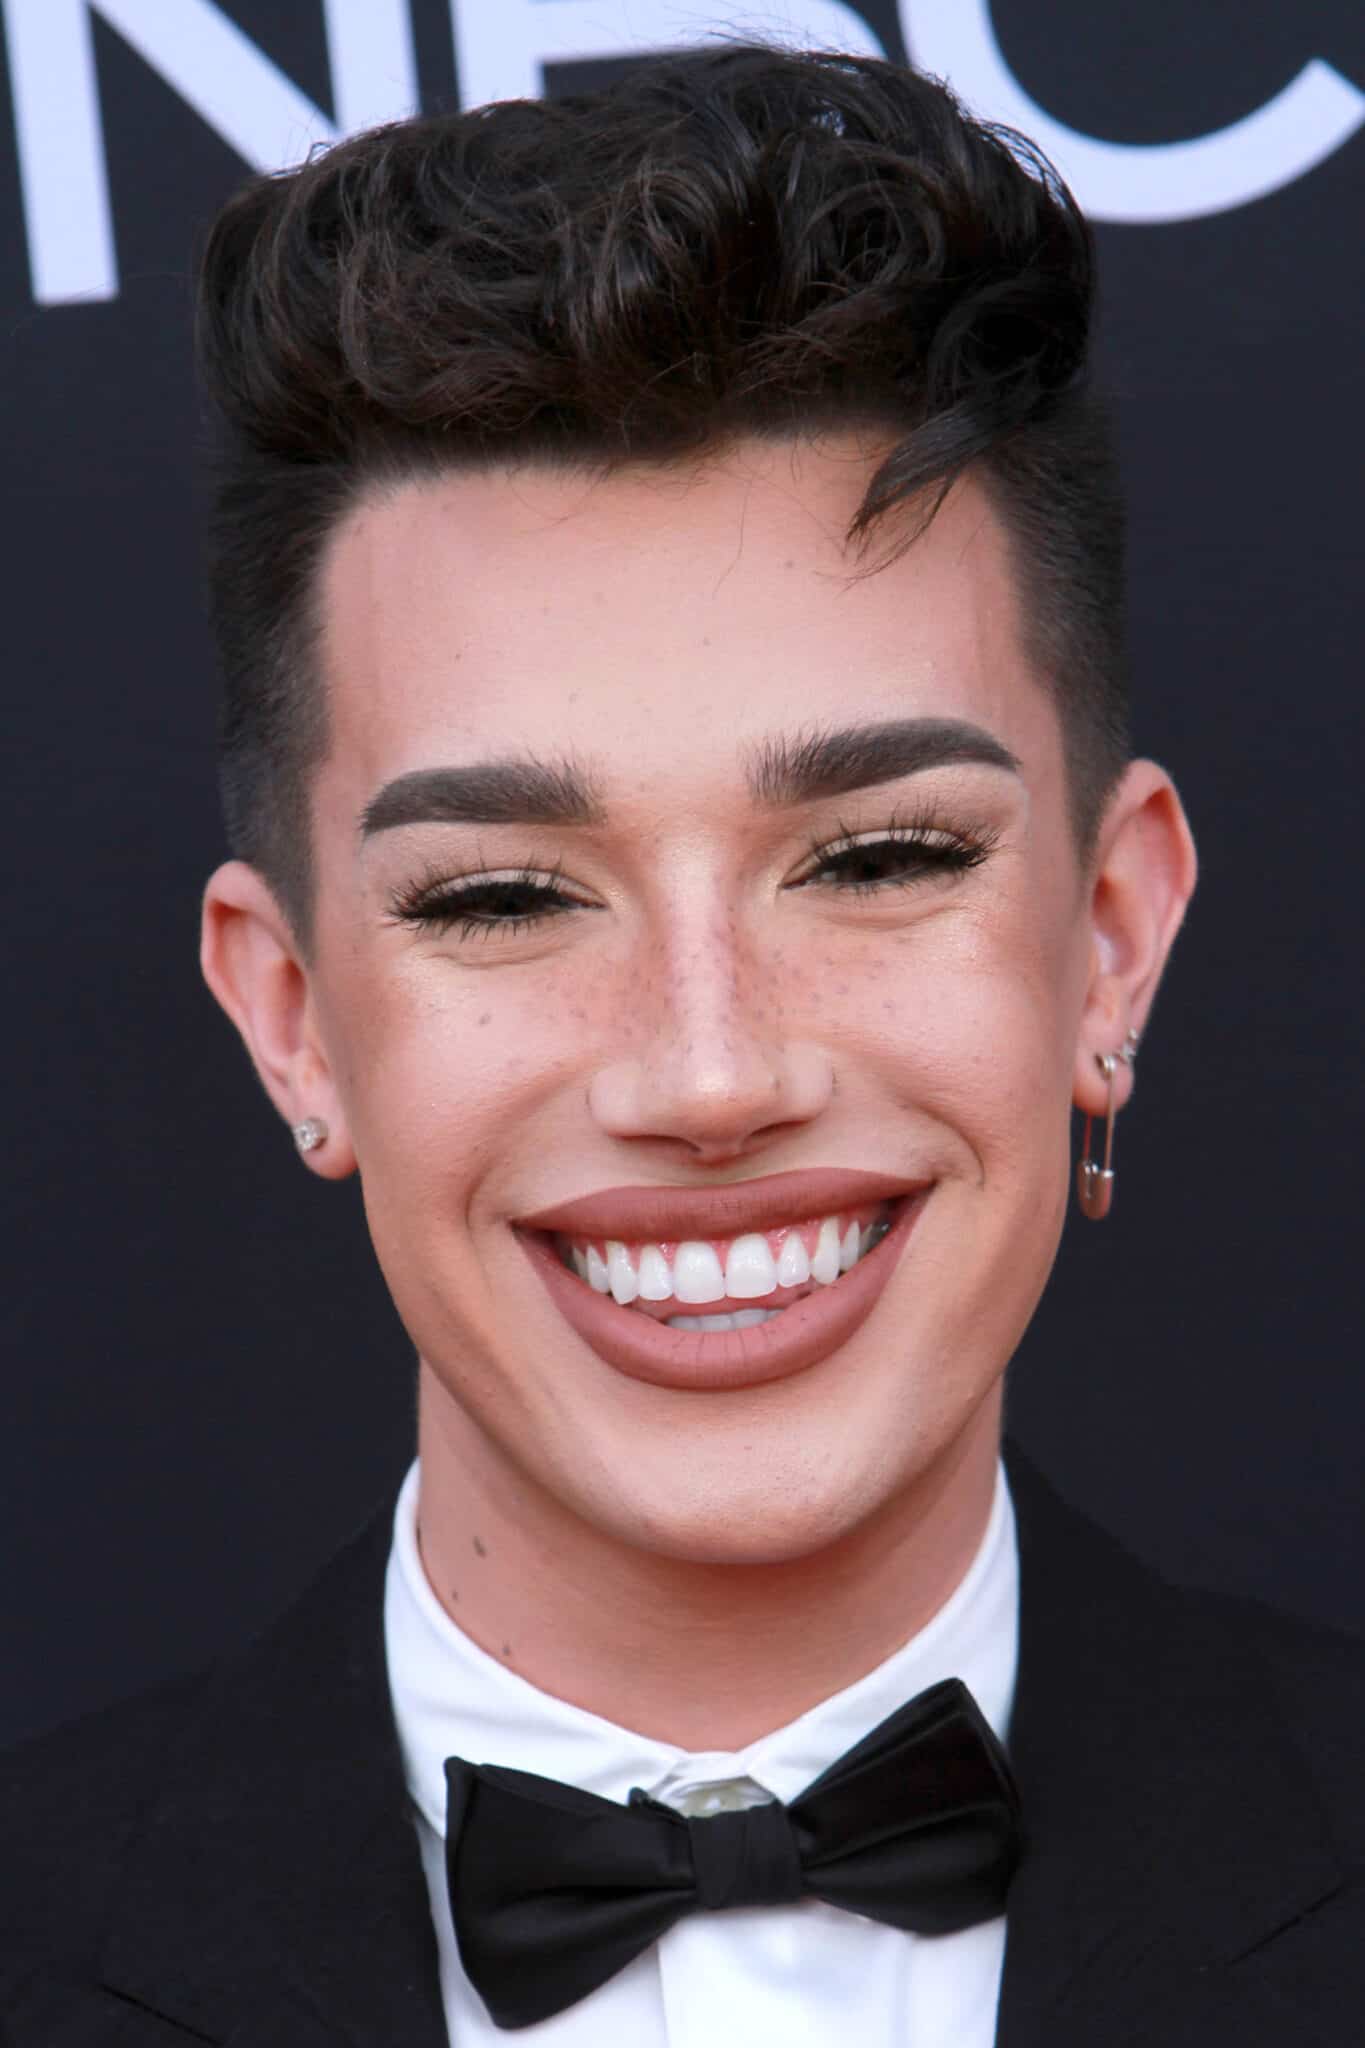 Who Are James Charles’ Closest Friends?